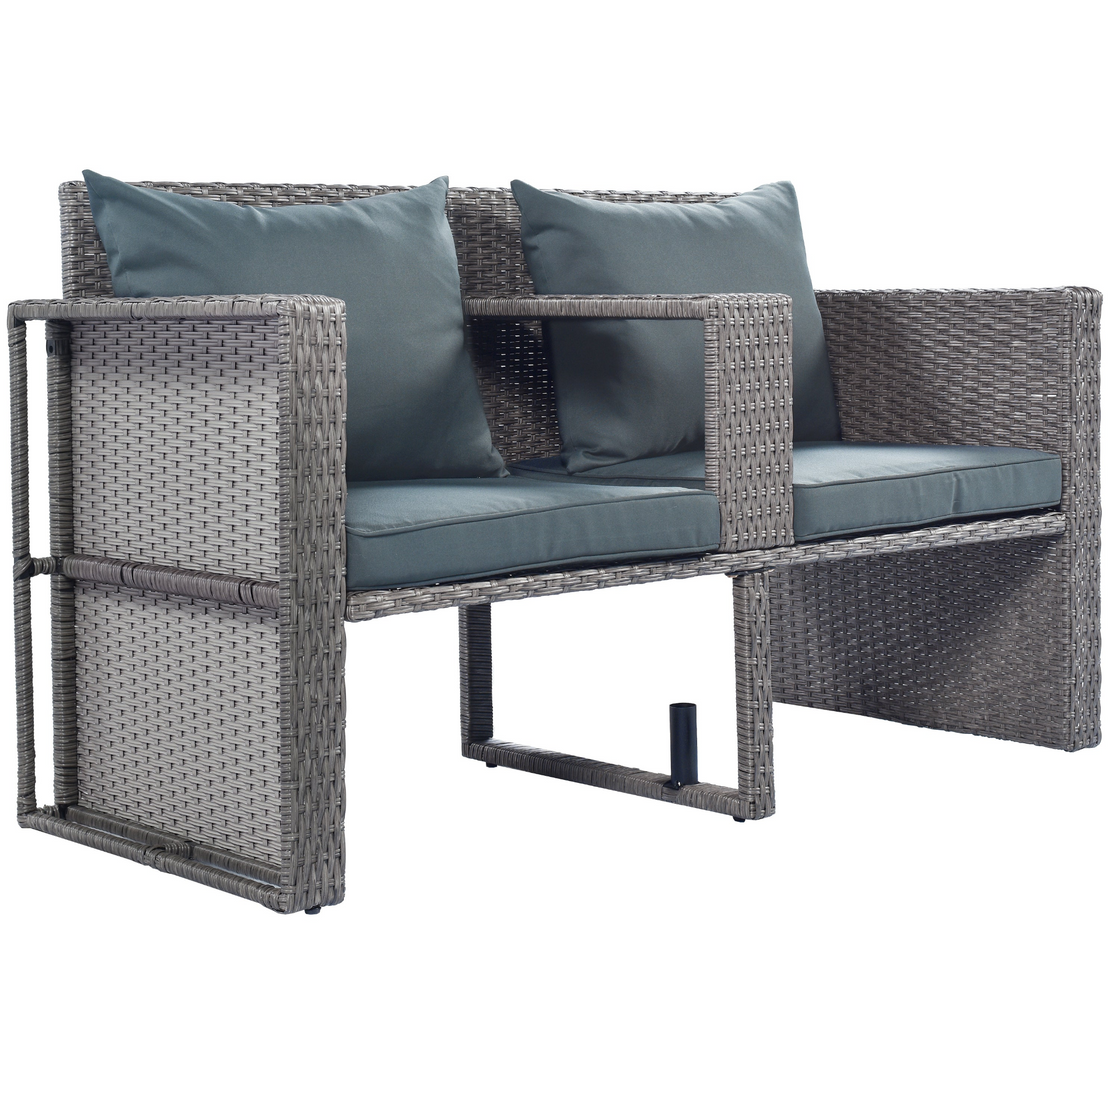 TOPMAX All-Weather PE Wicker Rattan Sofa Set with Side Table for Umbrella